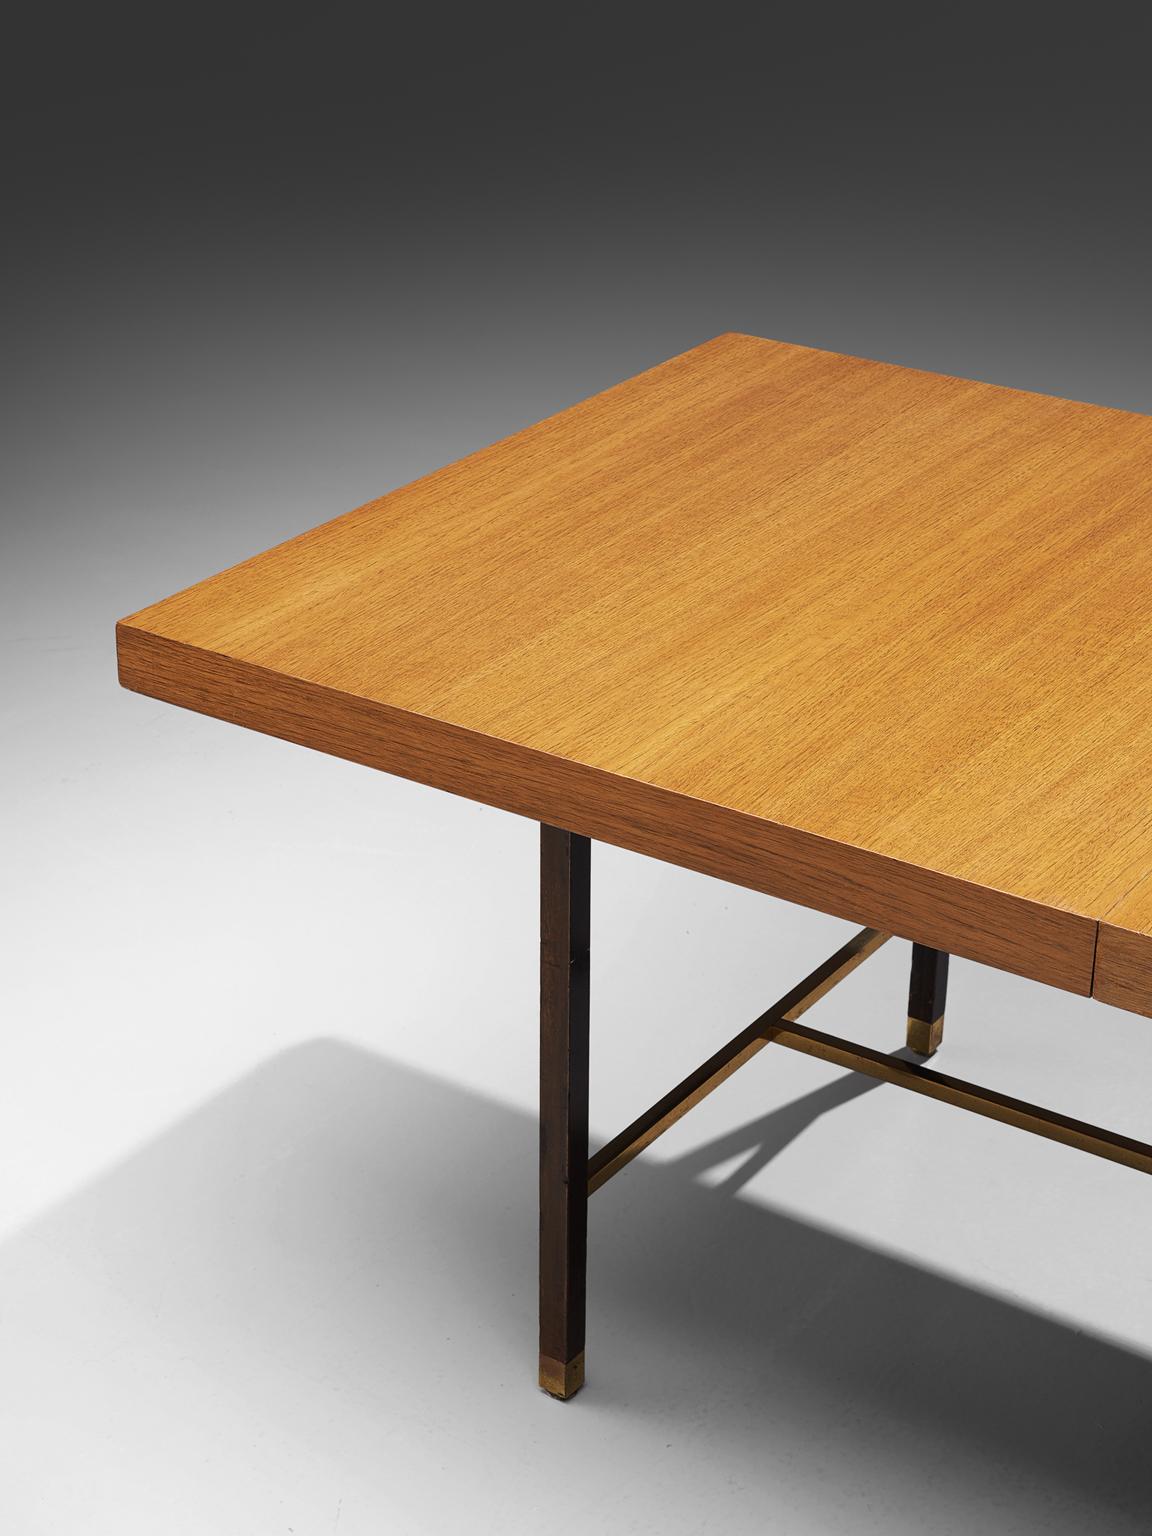 Mid-20th Century Harvey Probber Brass and Mahogany Extendable Dining Table